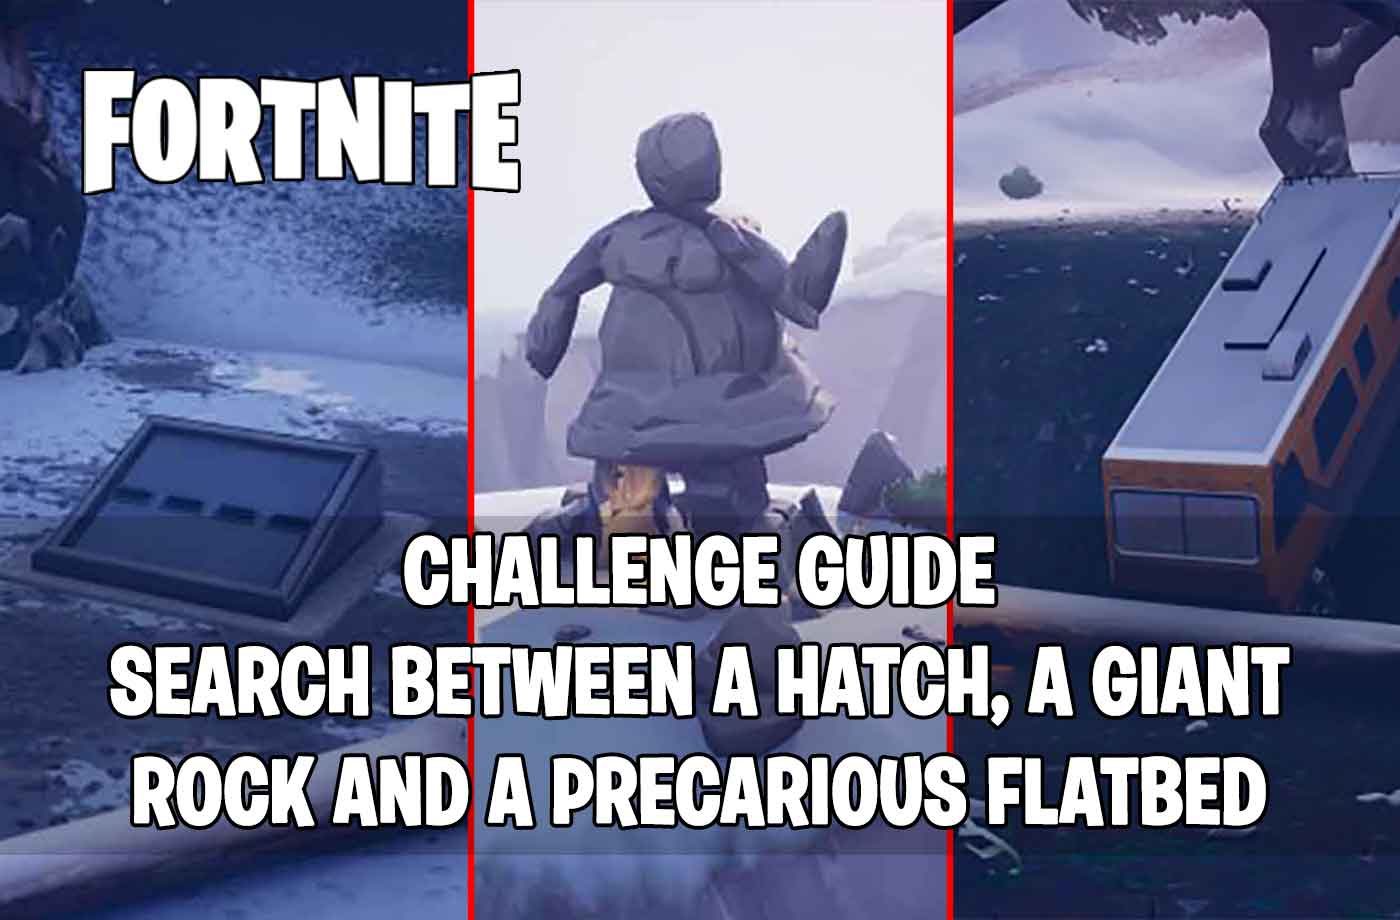 guide fortnite how complete the challenge of searching between a hatch a giant rock and a precarious flatbed - fortnite rock lady hatch